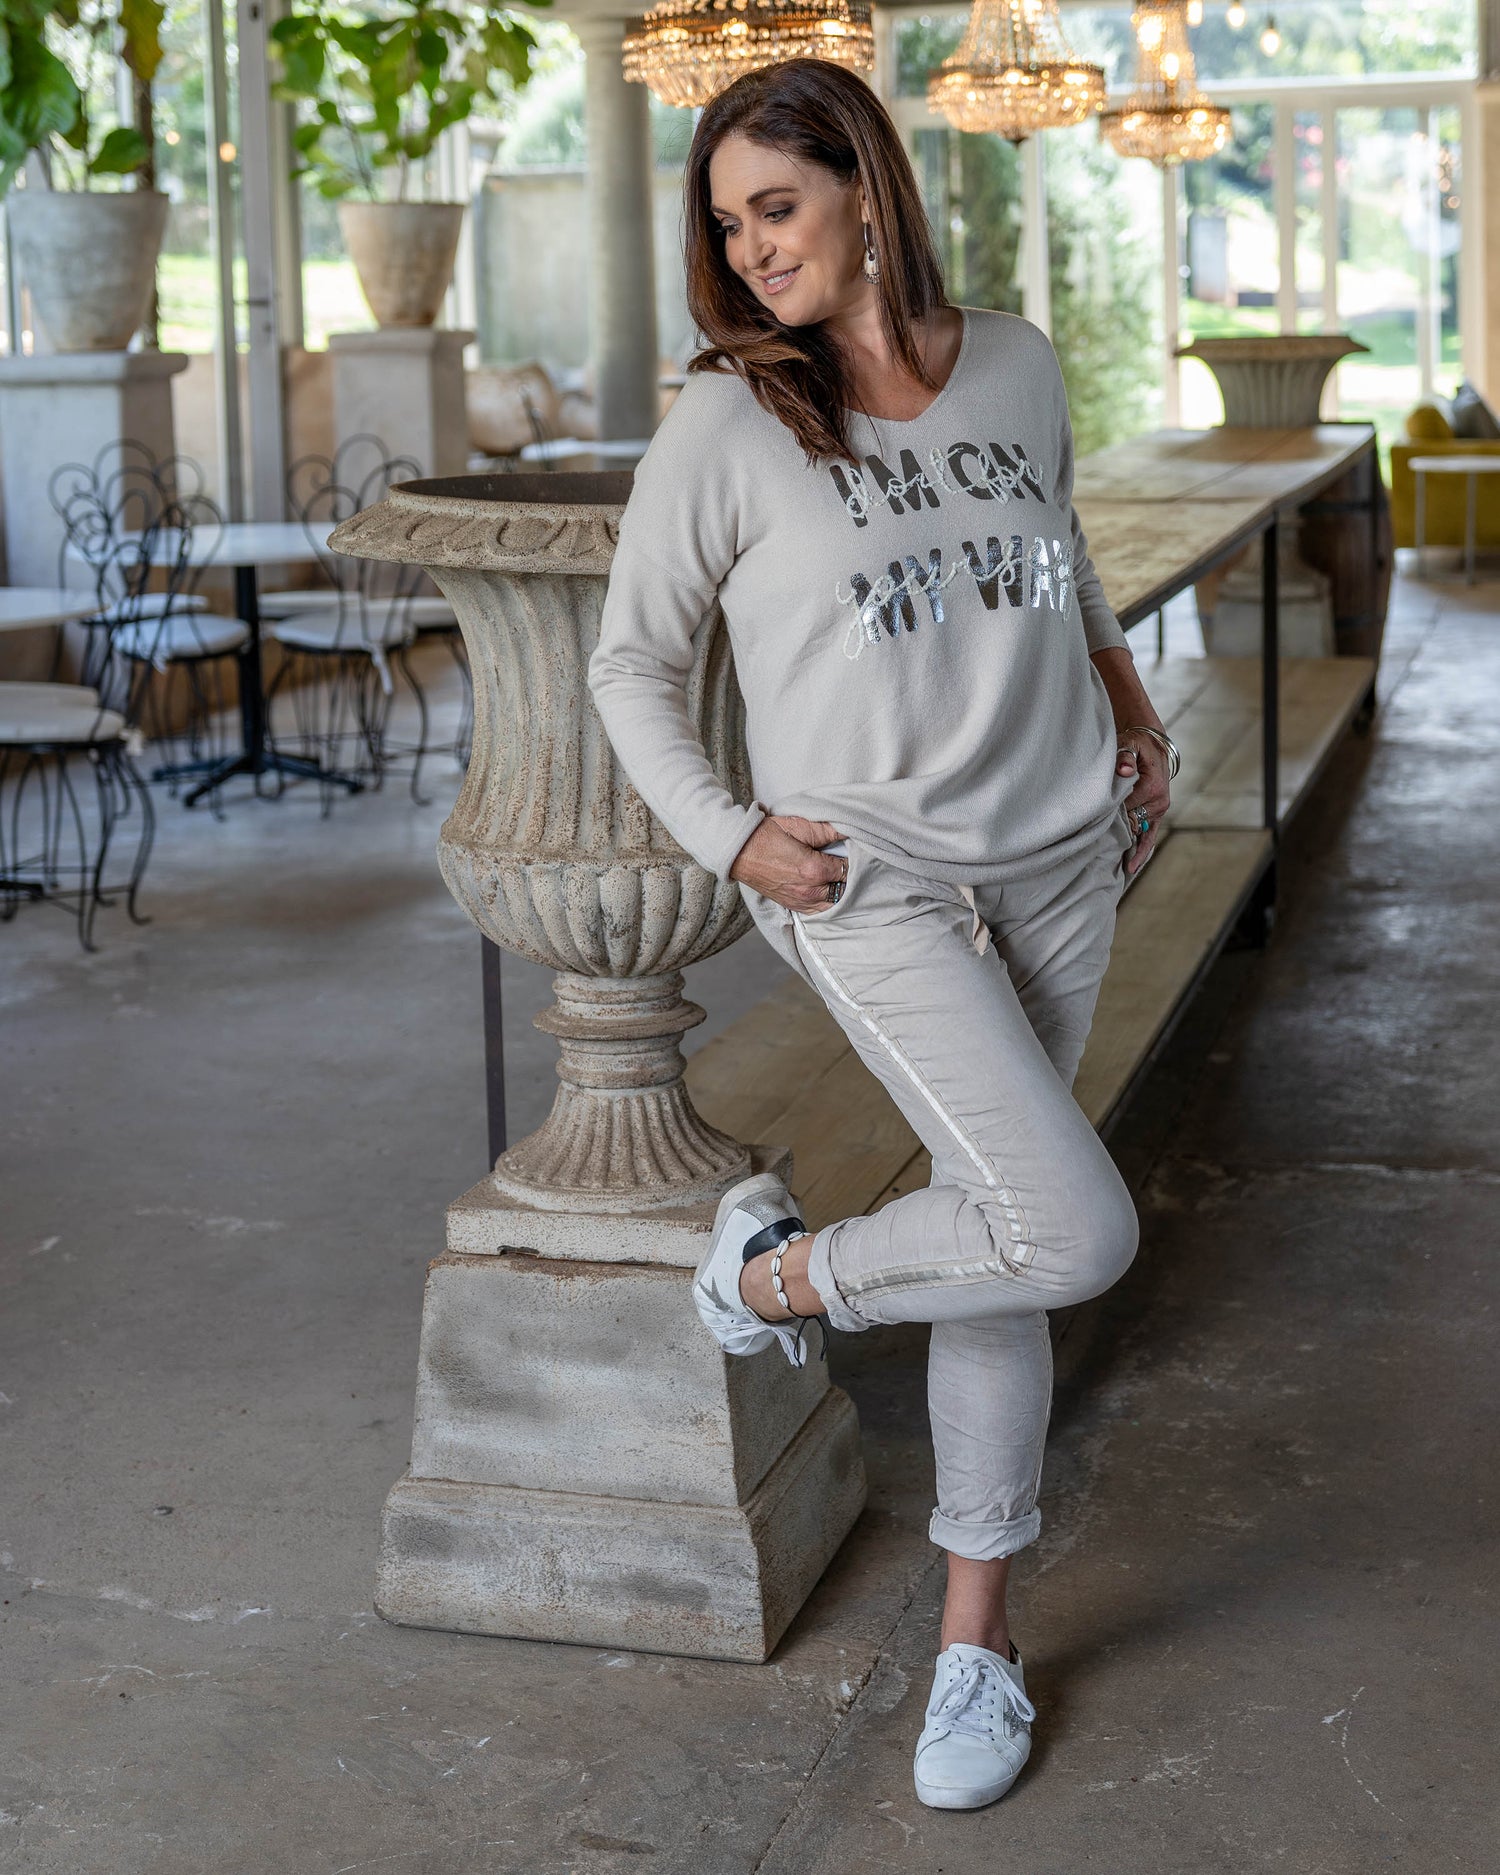 This thick, warm knit features a striking silver foil print with subtle embroidery detail and a braided back insert, making it a standout piece in your winter wardrobe. Designed with a longer length, this knit pairs perfectly with leggings, providing ample coverage and a flattering silhouette. The extended hemline ensures a cozy and chic look, ideal for layering